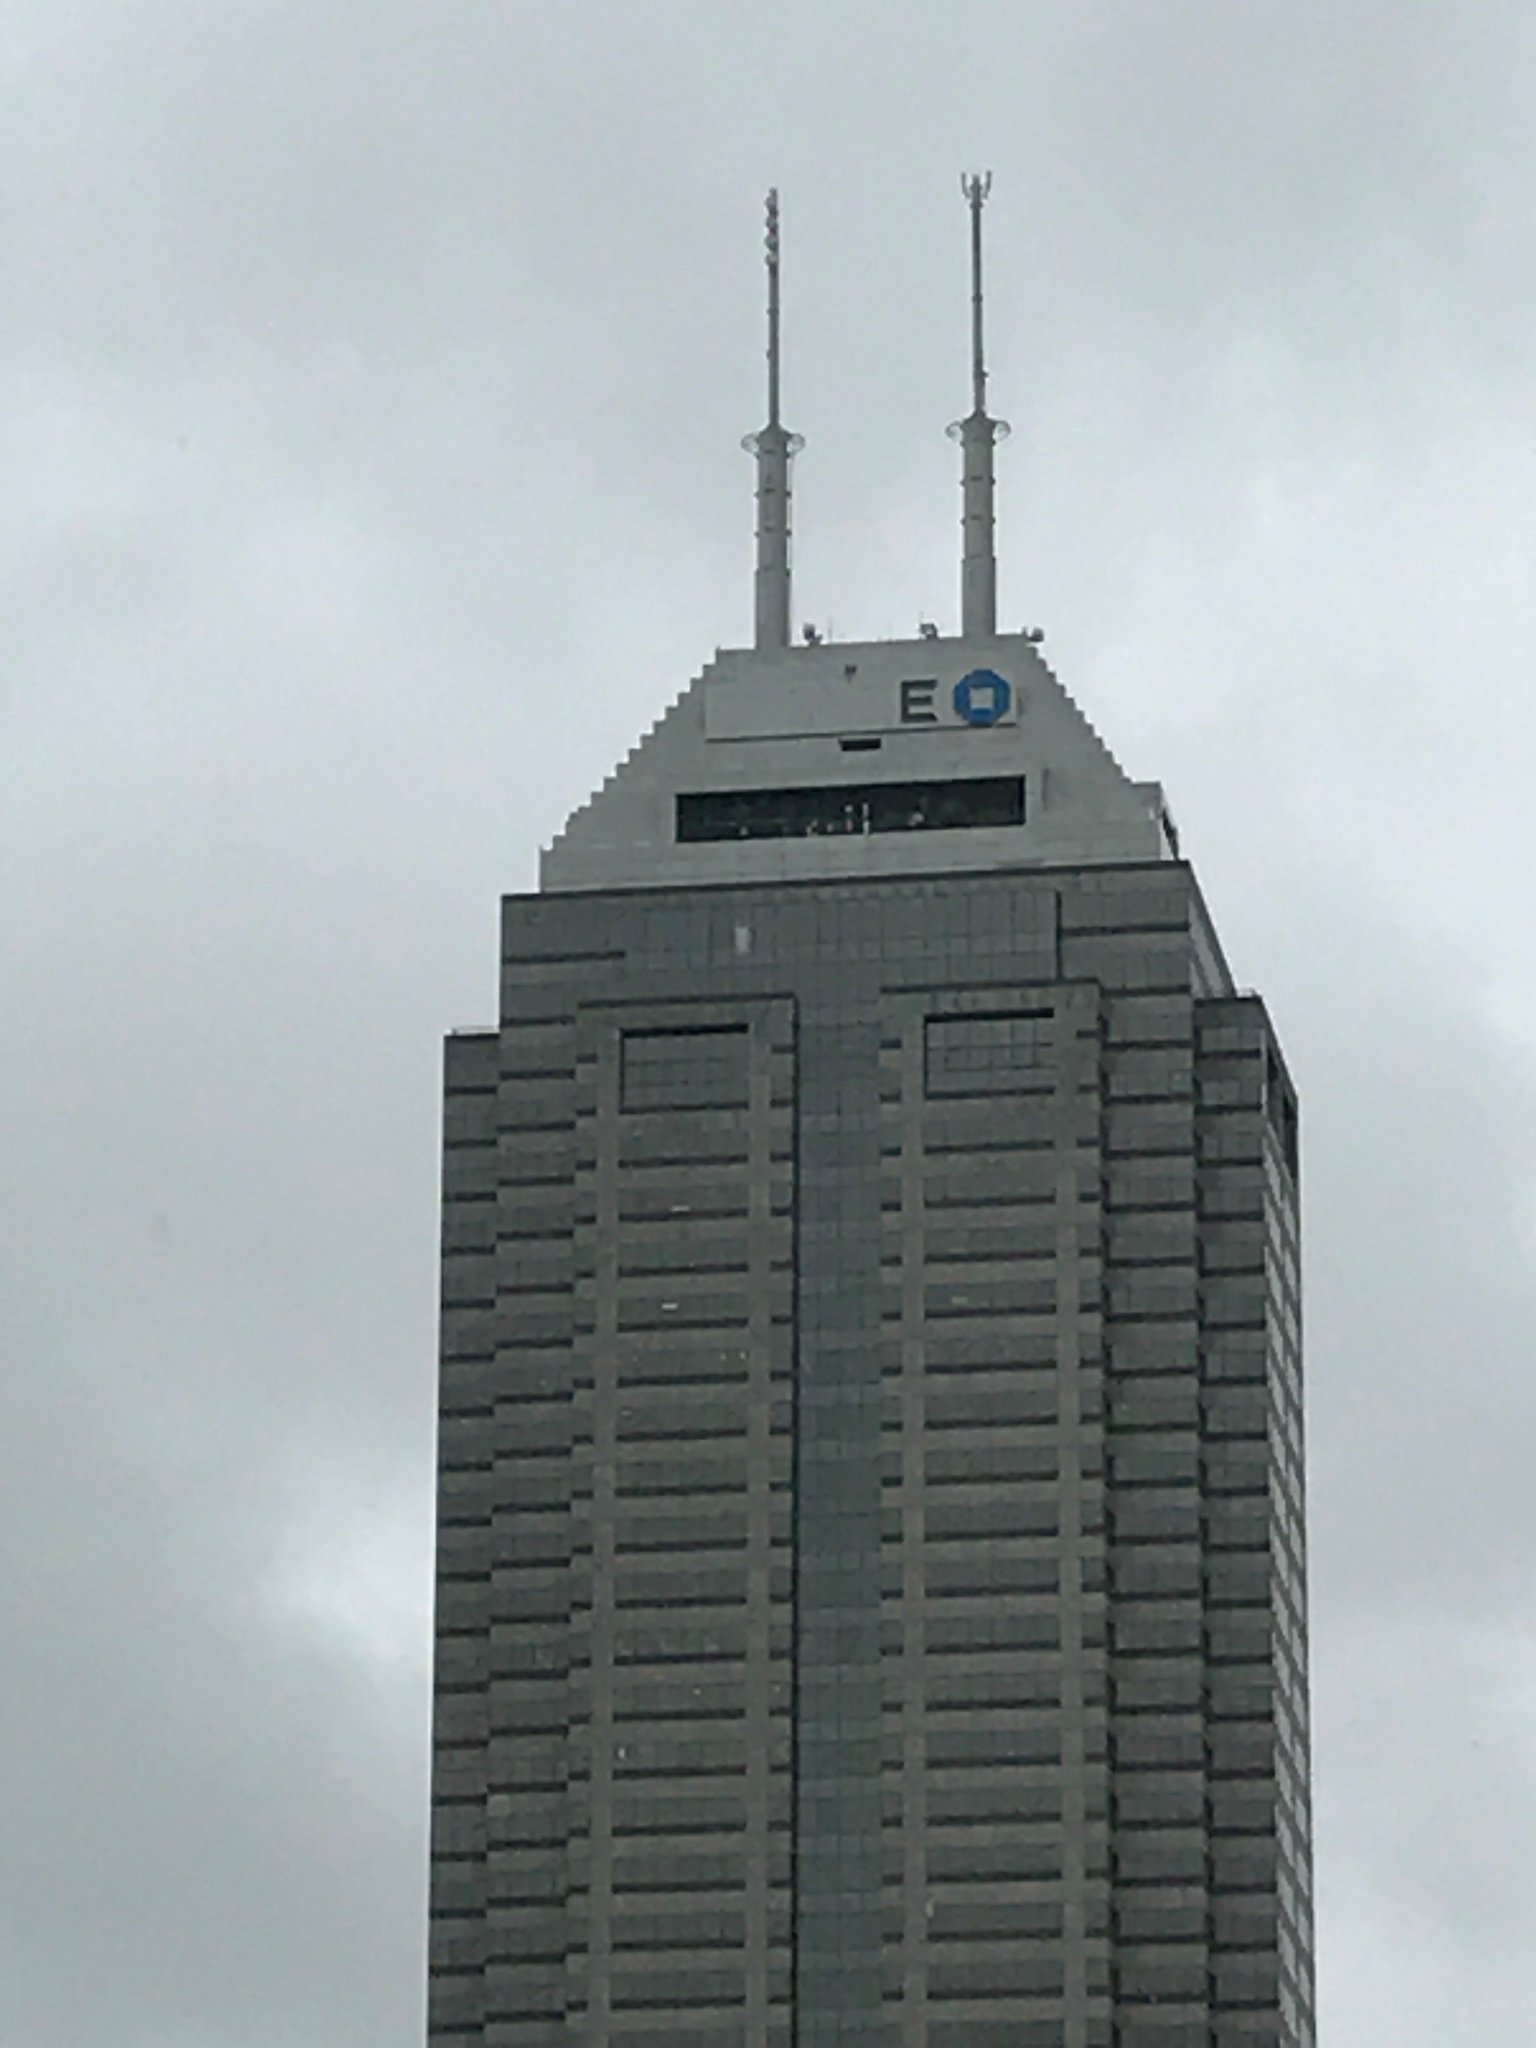 Gerry Dick on Twitter: "Bank? Insurance company? Nope. Before long, state's tallest building ...